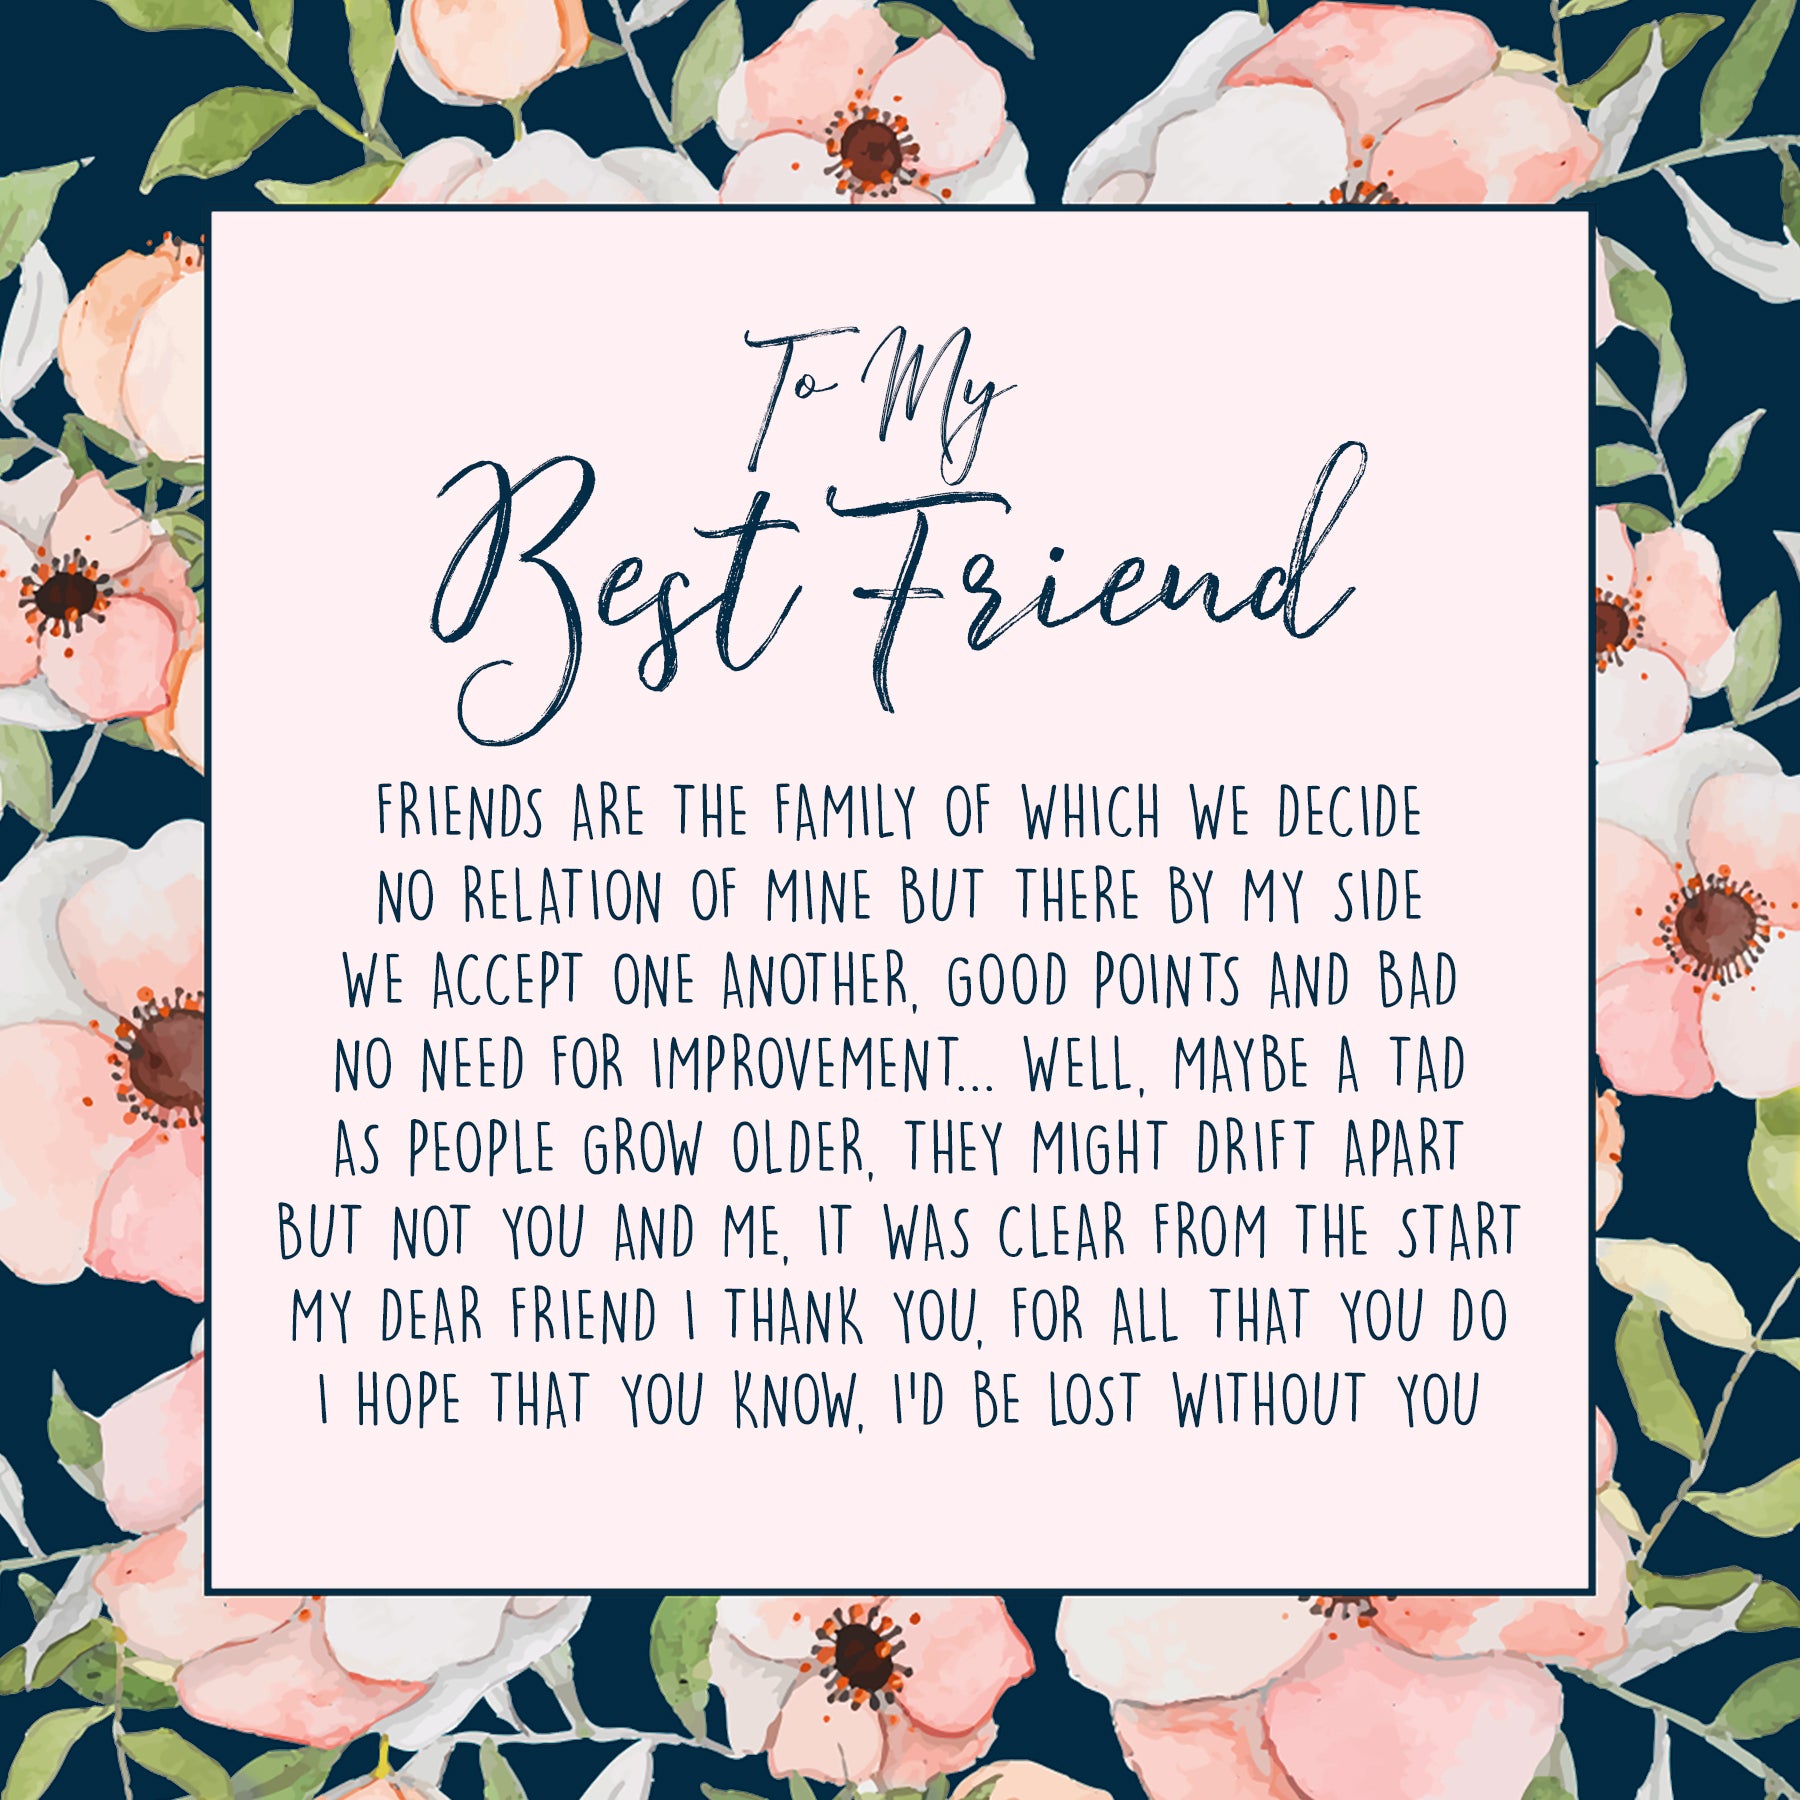 80+ heart touching friendship messages, quotes, and texts - Tuko.co.ke